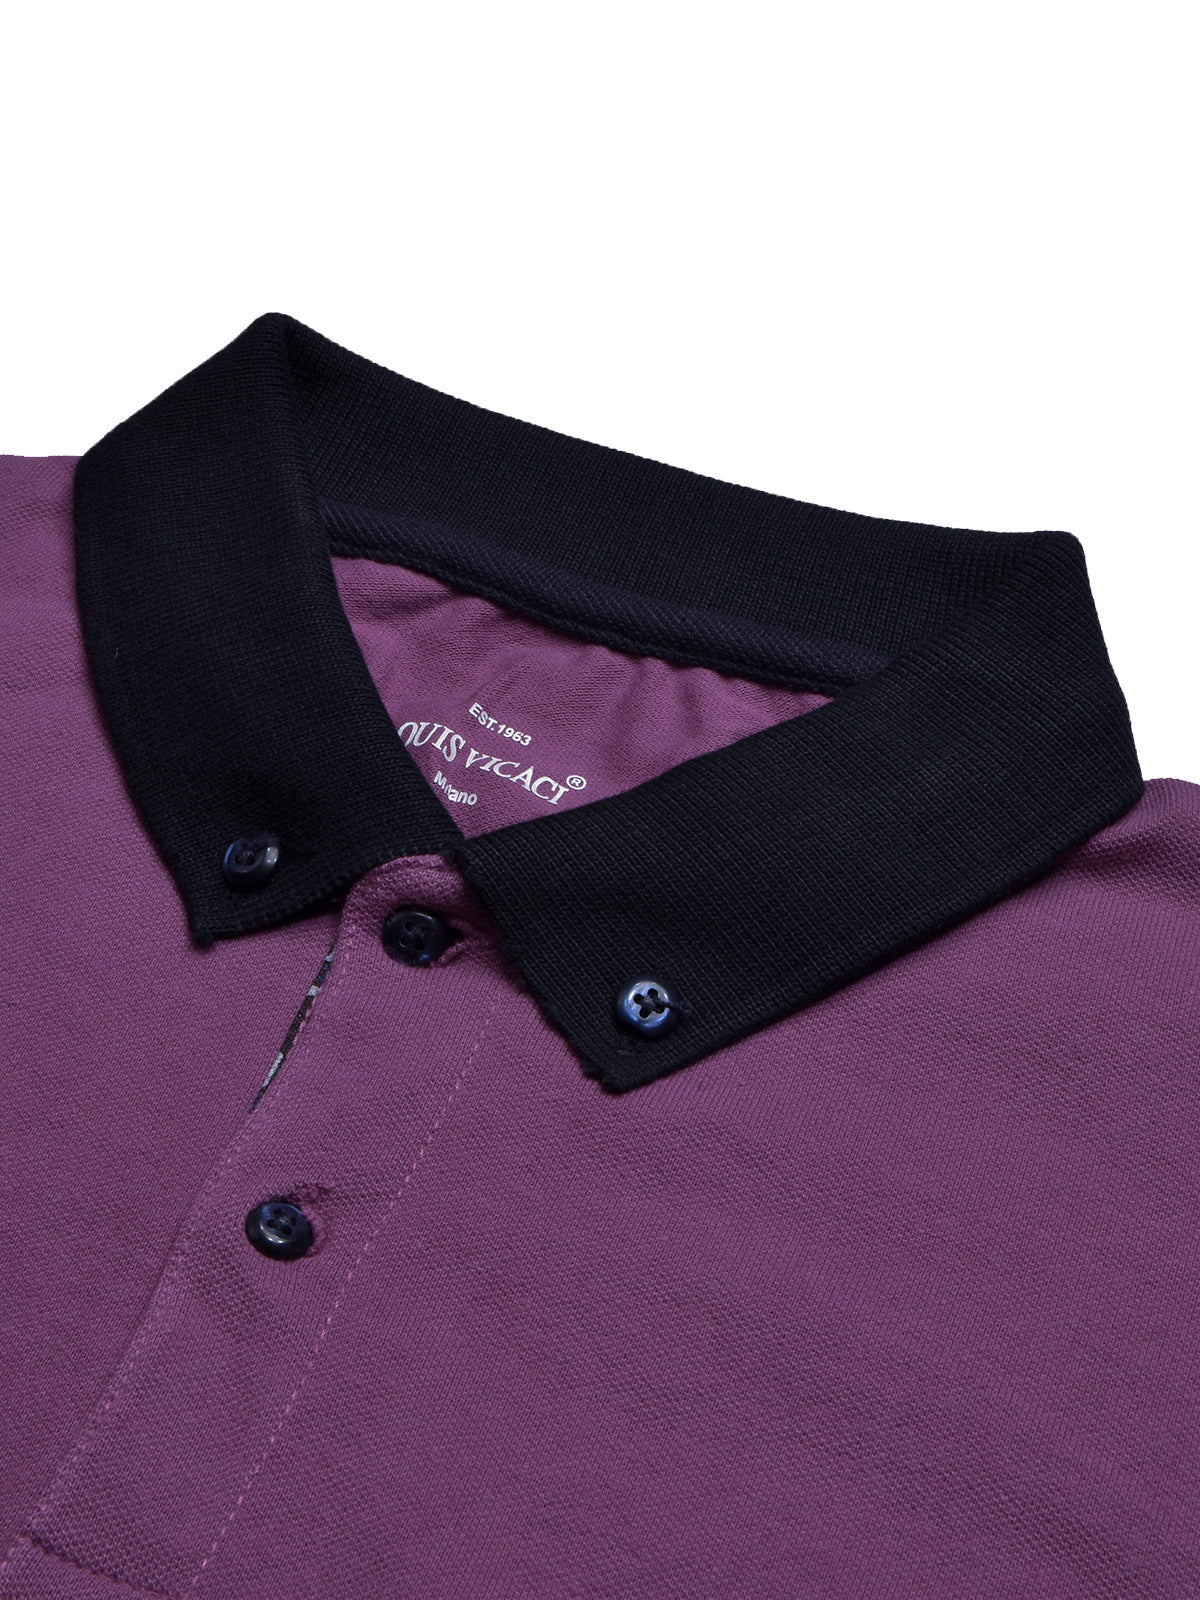 LV Summer Polo Shirt For Men-Purple with Navy-BE711/BR12964